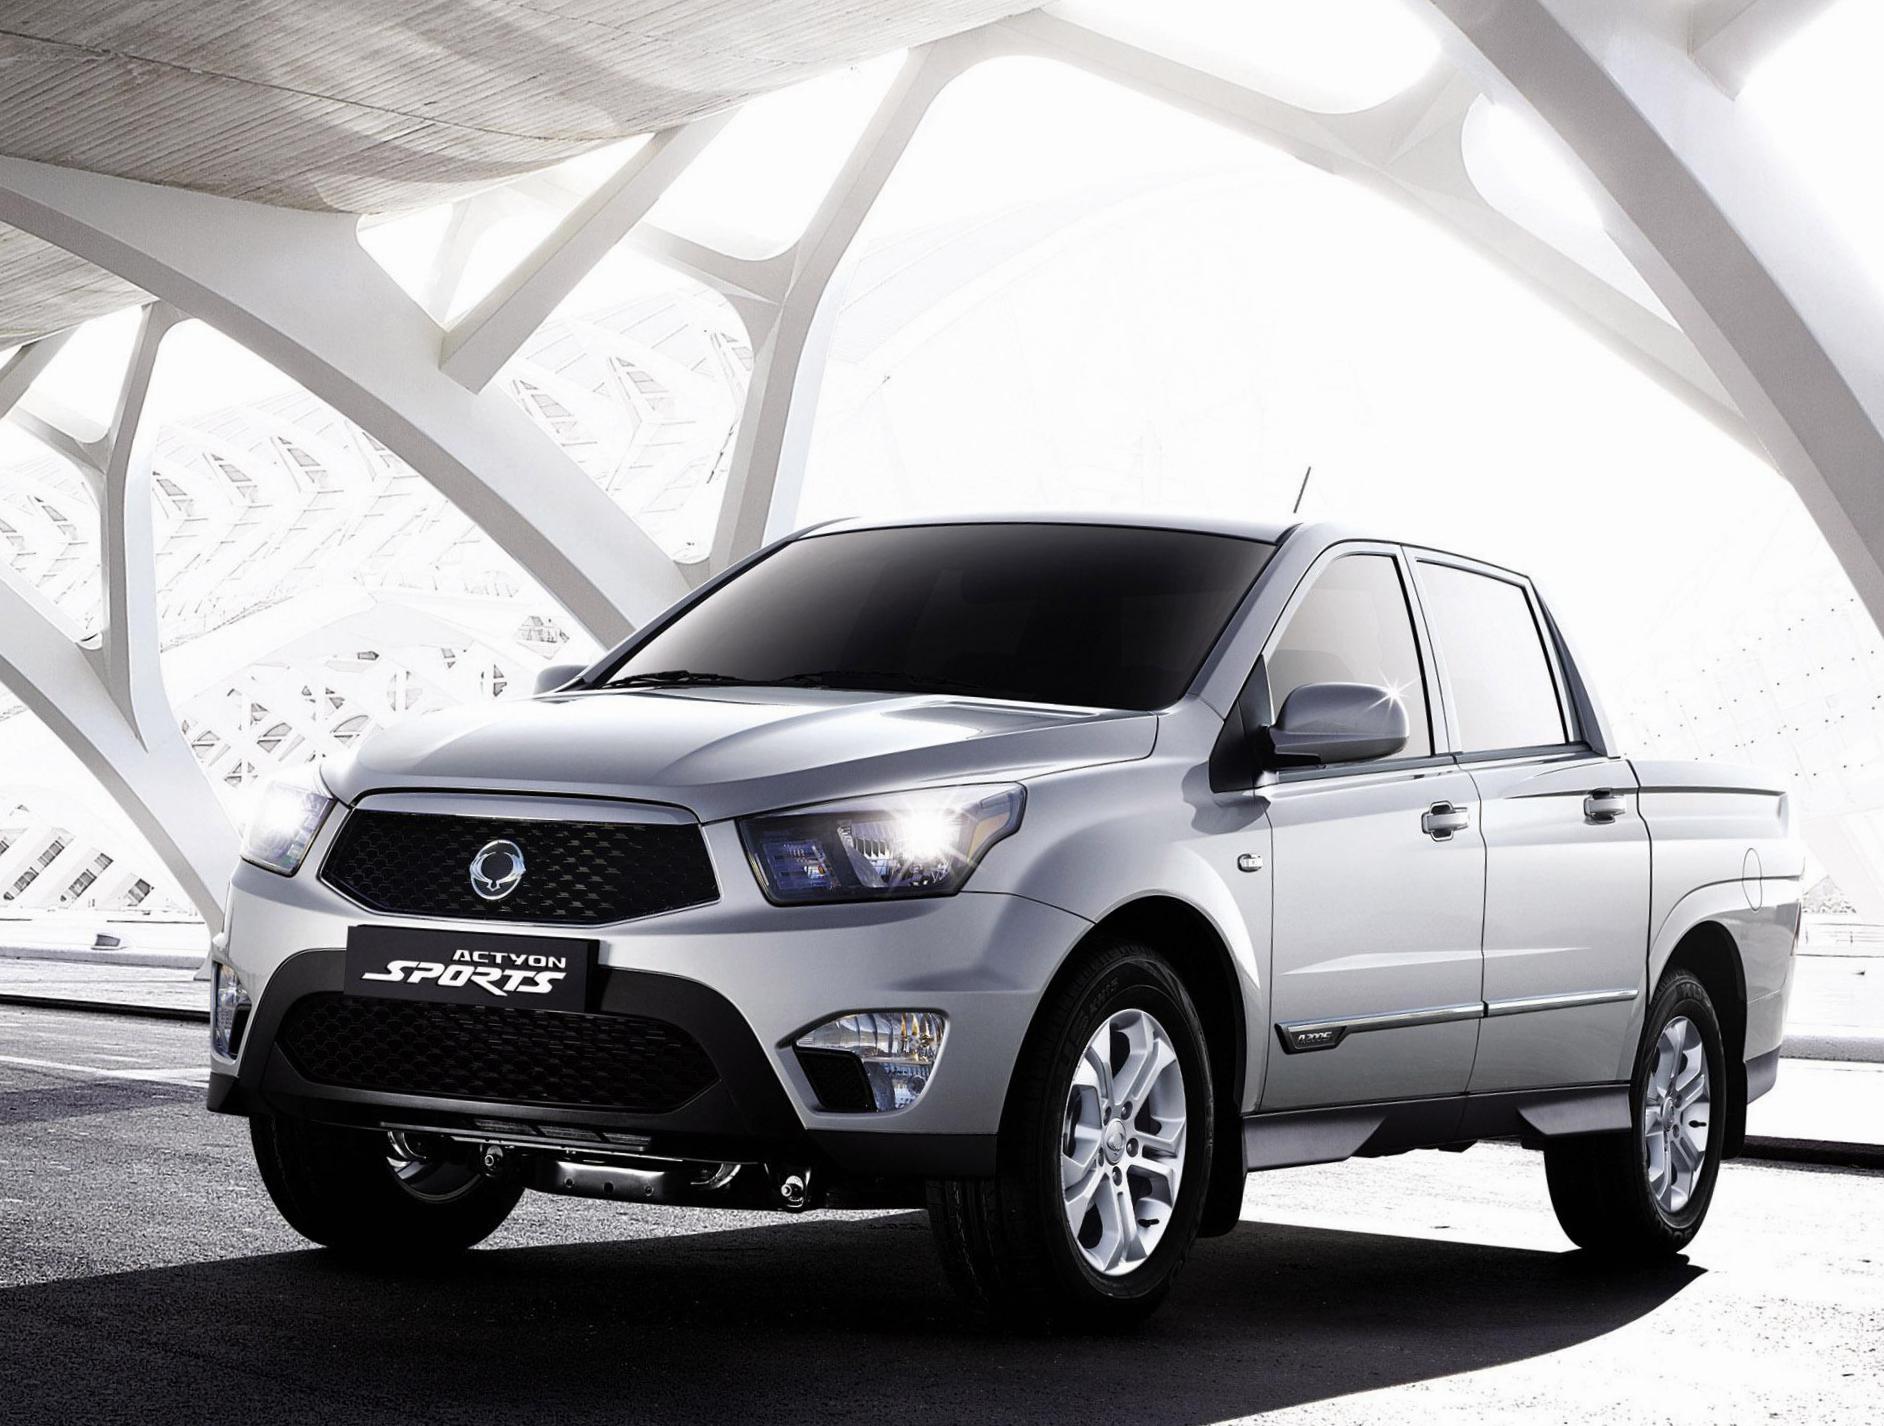 Actyon Sports SsangYong lease 2013